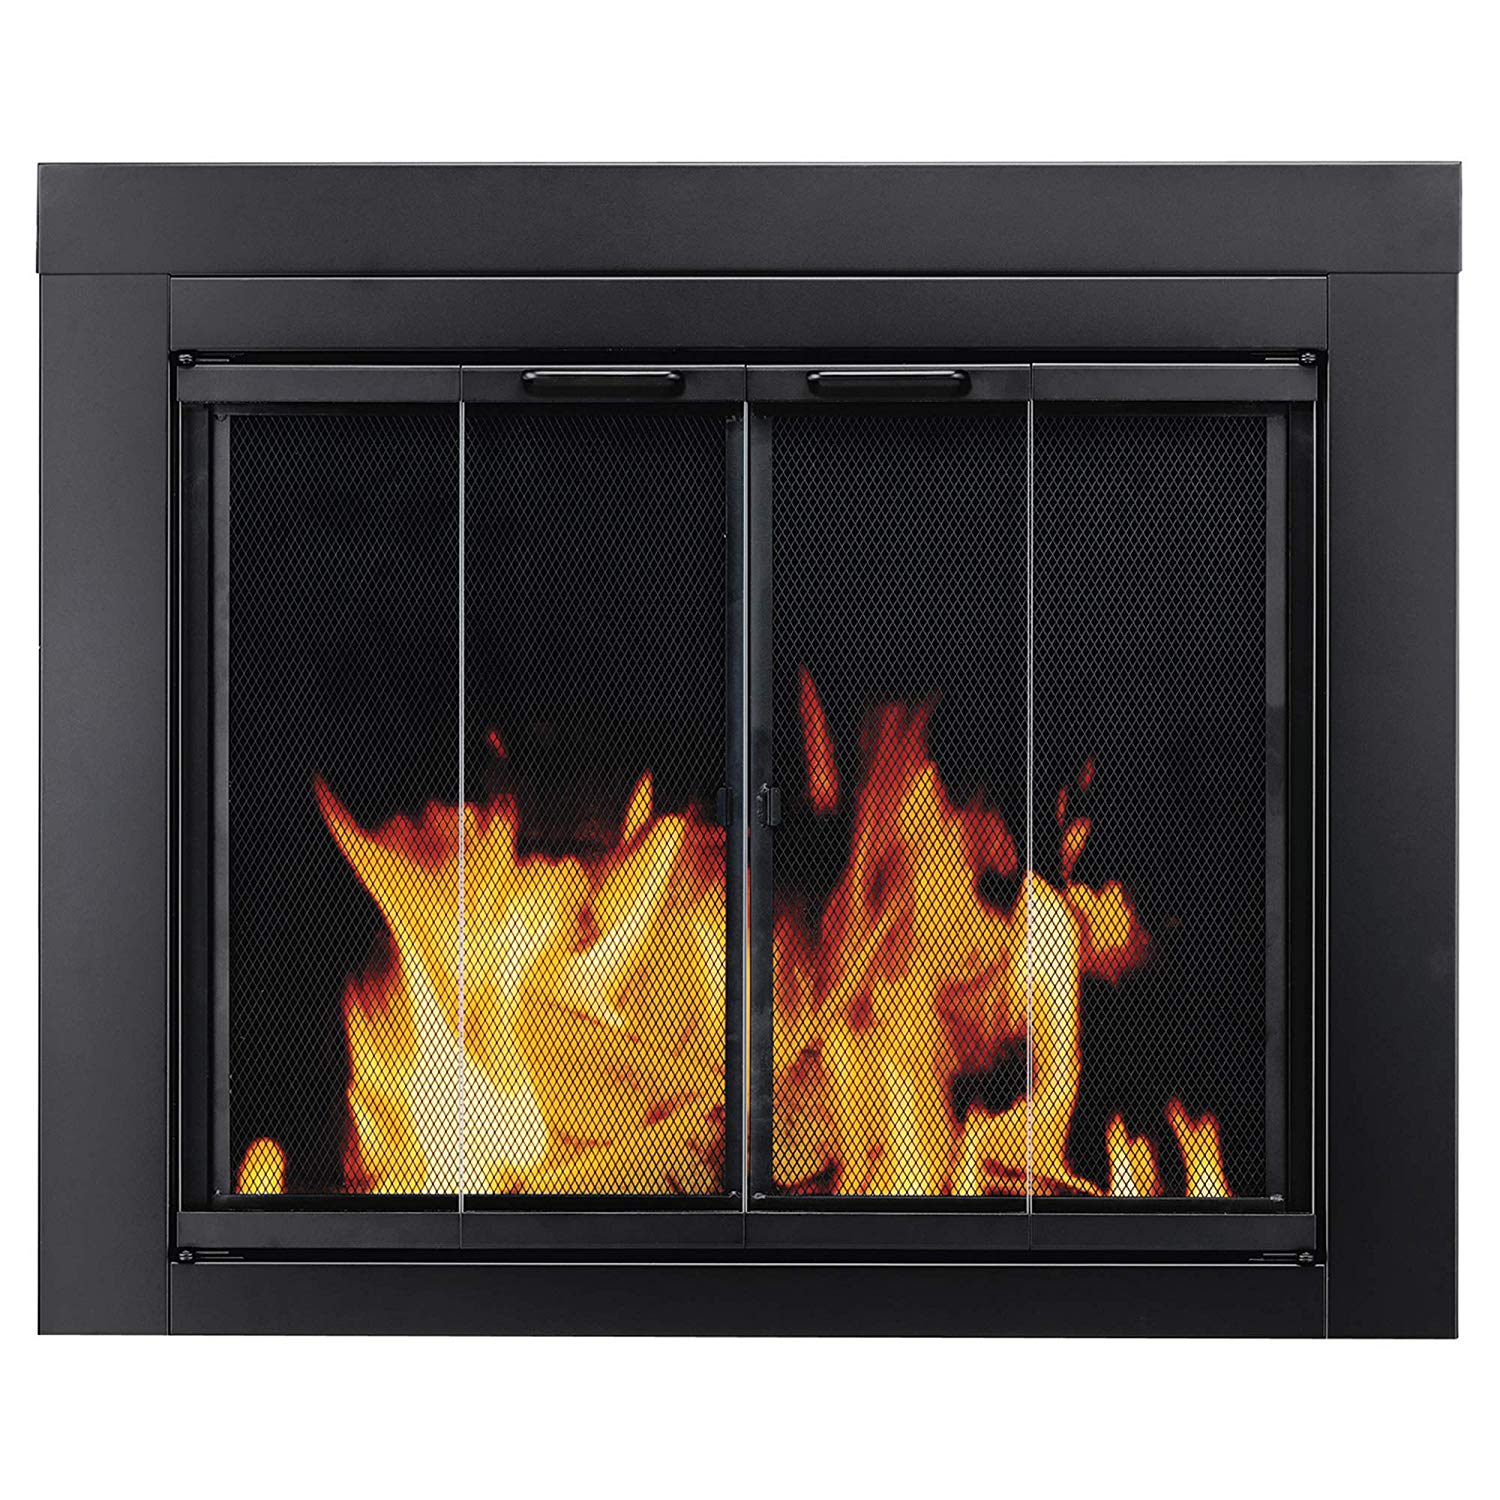 Pleasant Hearth Fireplace Screen Luxury Pleasant Hearth at 1000 ascot Fireplace Glass Door Black Small